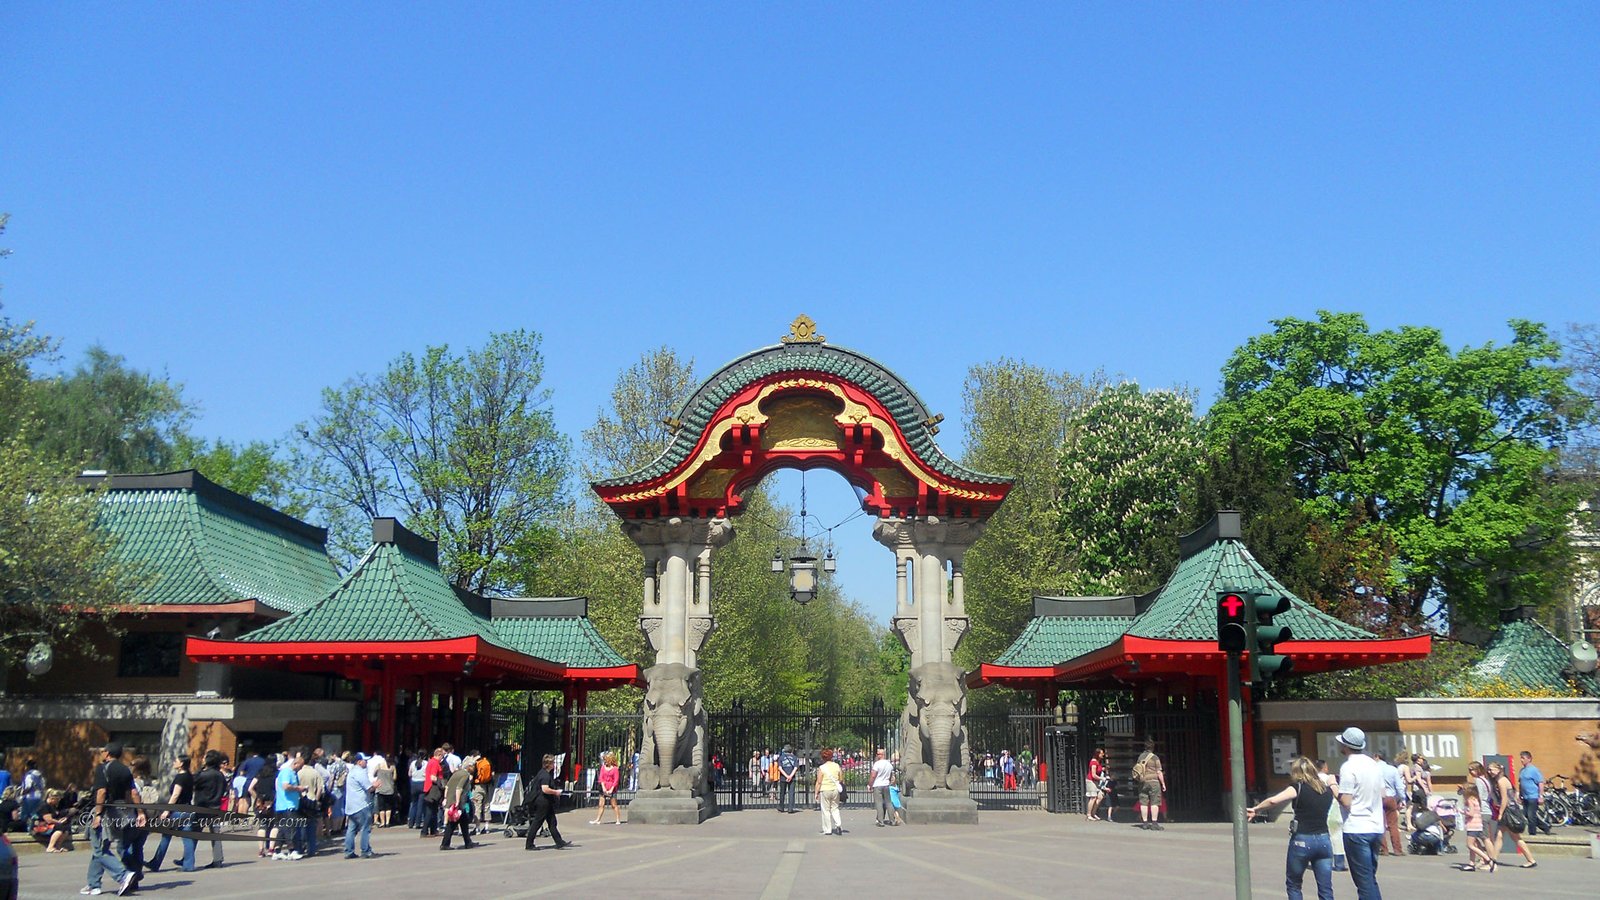 The Zoologischer Garten in Berlin is the oldest zoo in Germany and the largest in the world.